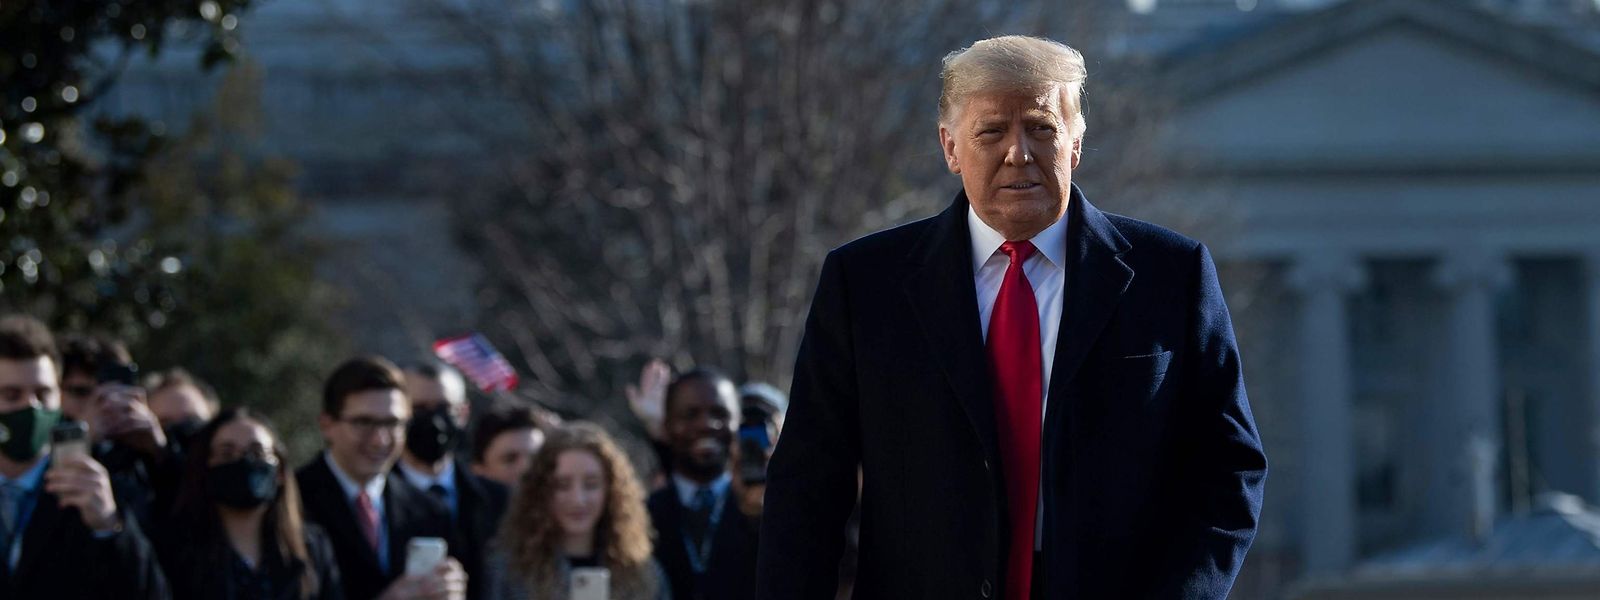 US President Donald Trump walks by supporters outside the White House on January 12, 2021 in Washington,DC before his departure to Alamo, Texas. (Photo by Brendan Smialowski / AFP)